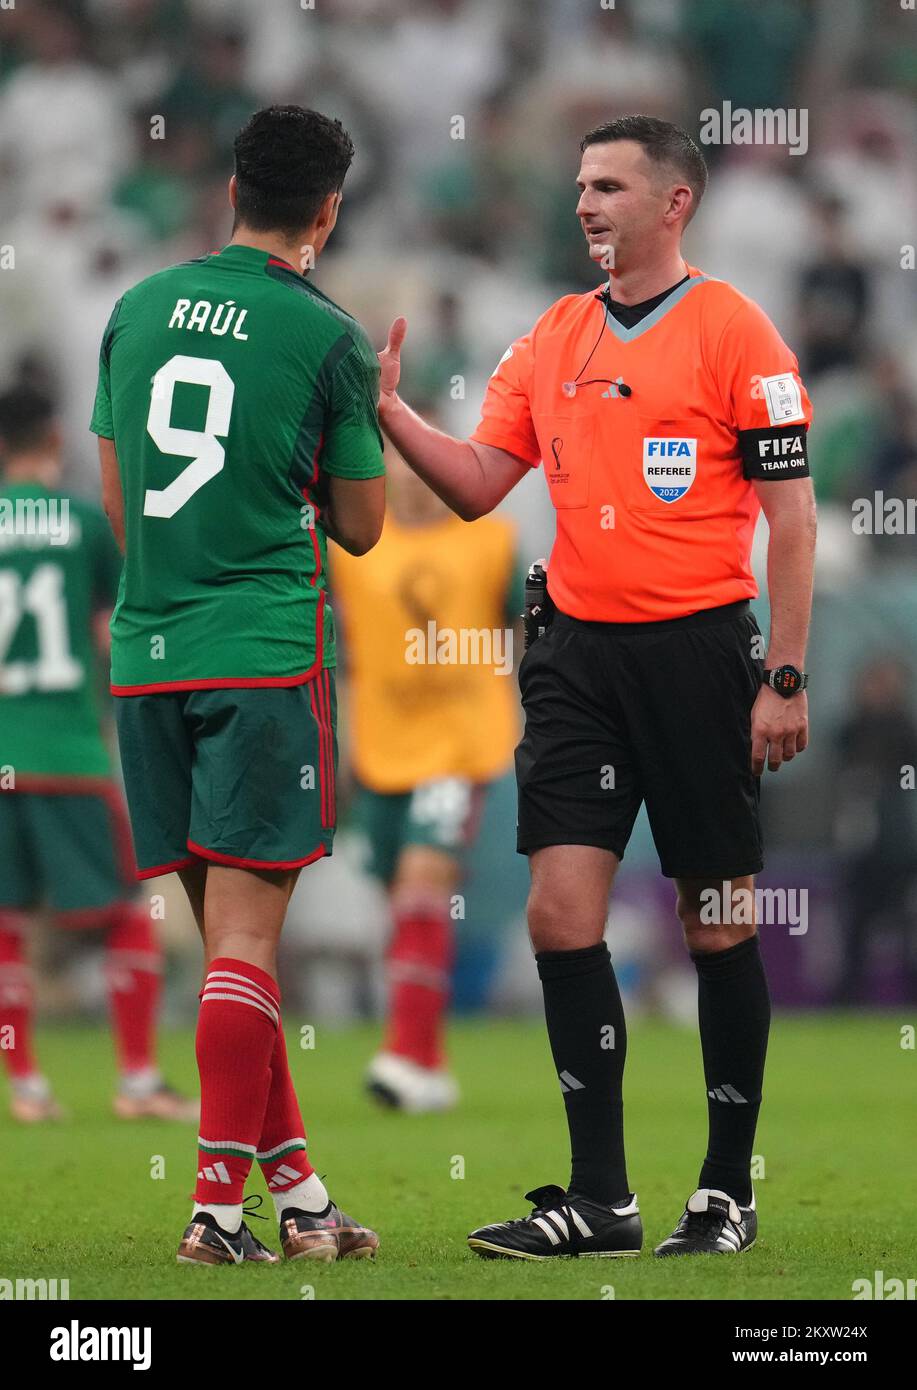 Match referee Michael Oliver shows his watch to Mexico's Raul Jimenez at full-time after the FIFA World Cup Group C match at the Lusail Stadium in Lusail, Qatar. Picture date: Wednesday November 30, 2022. Stock Photo